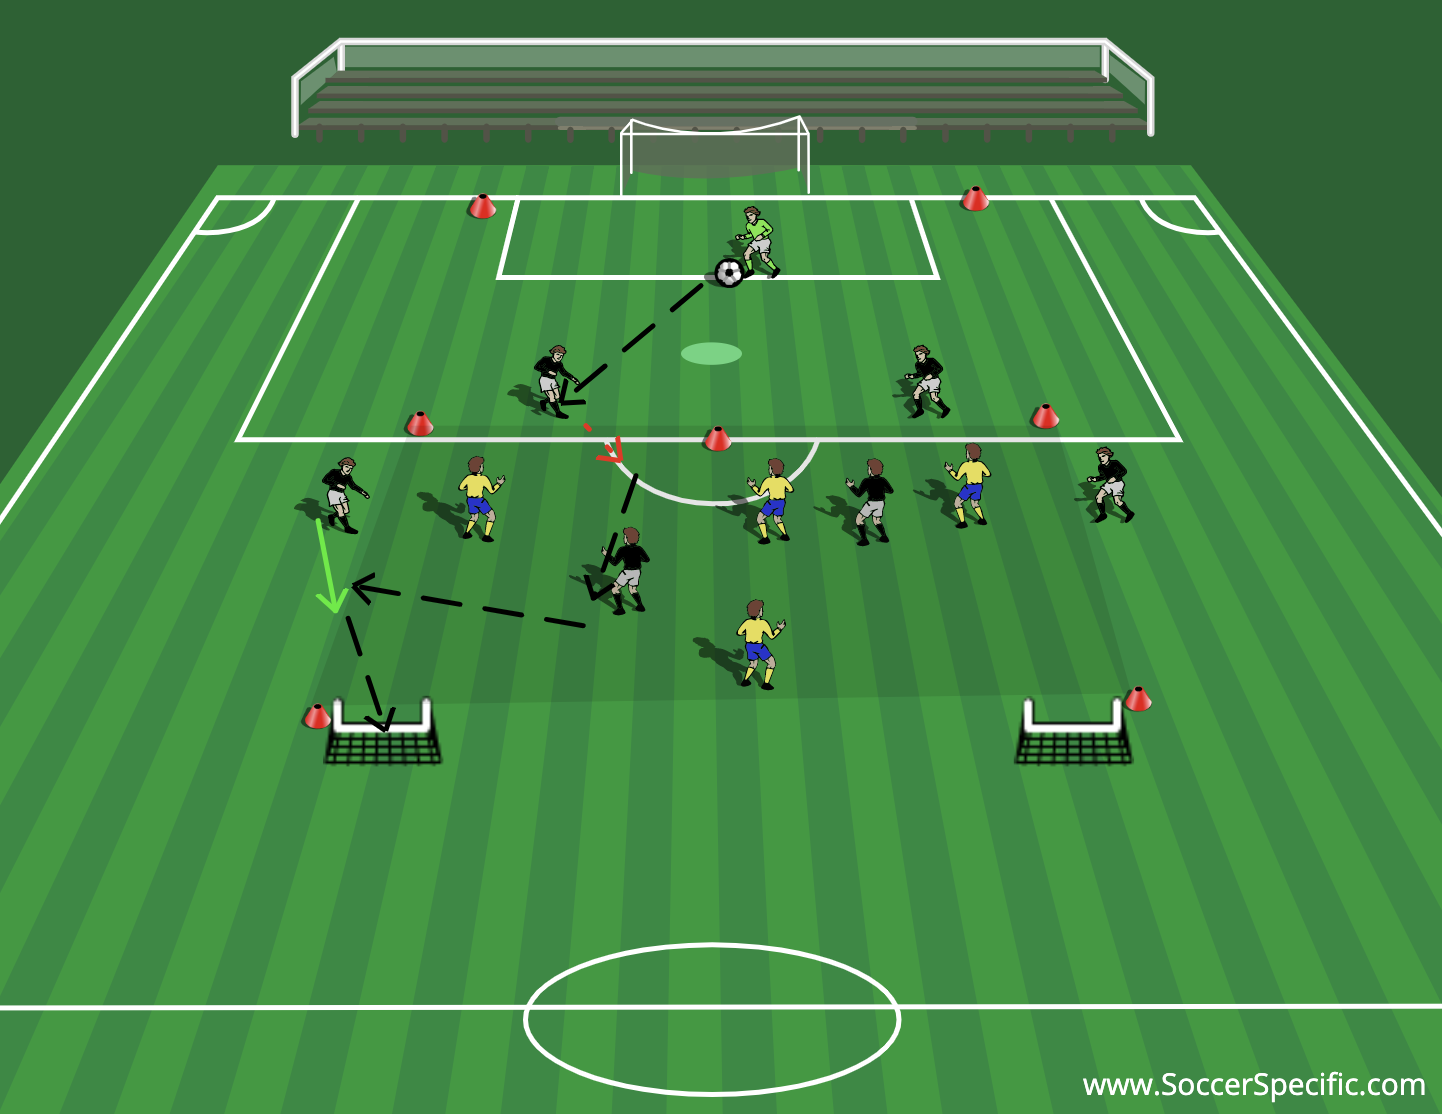 Building through the Midfield 3 | SoccerSpecific.com